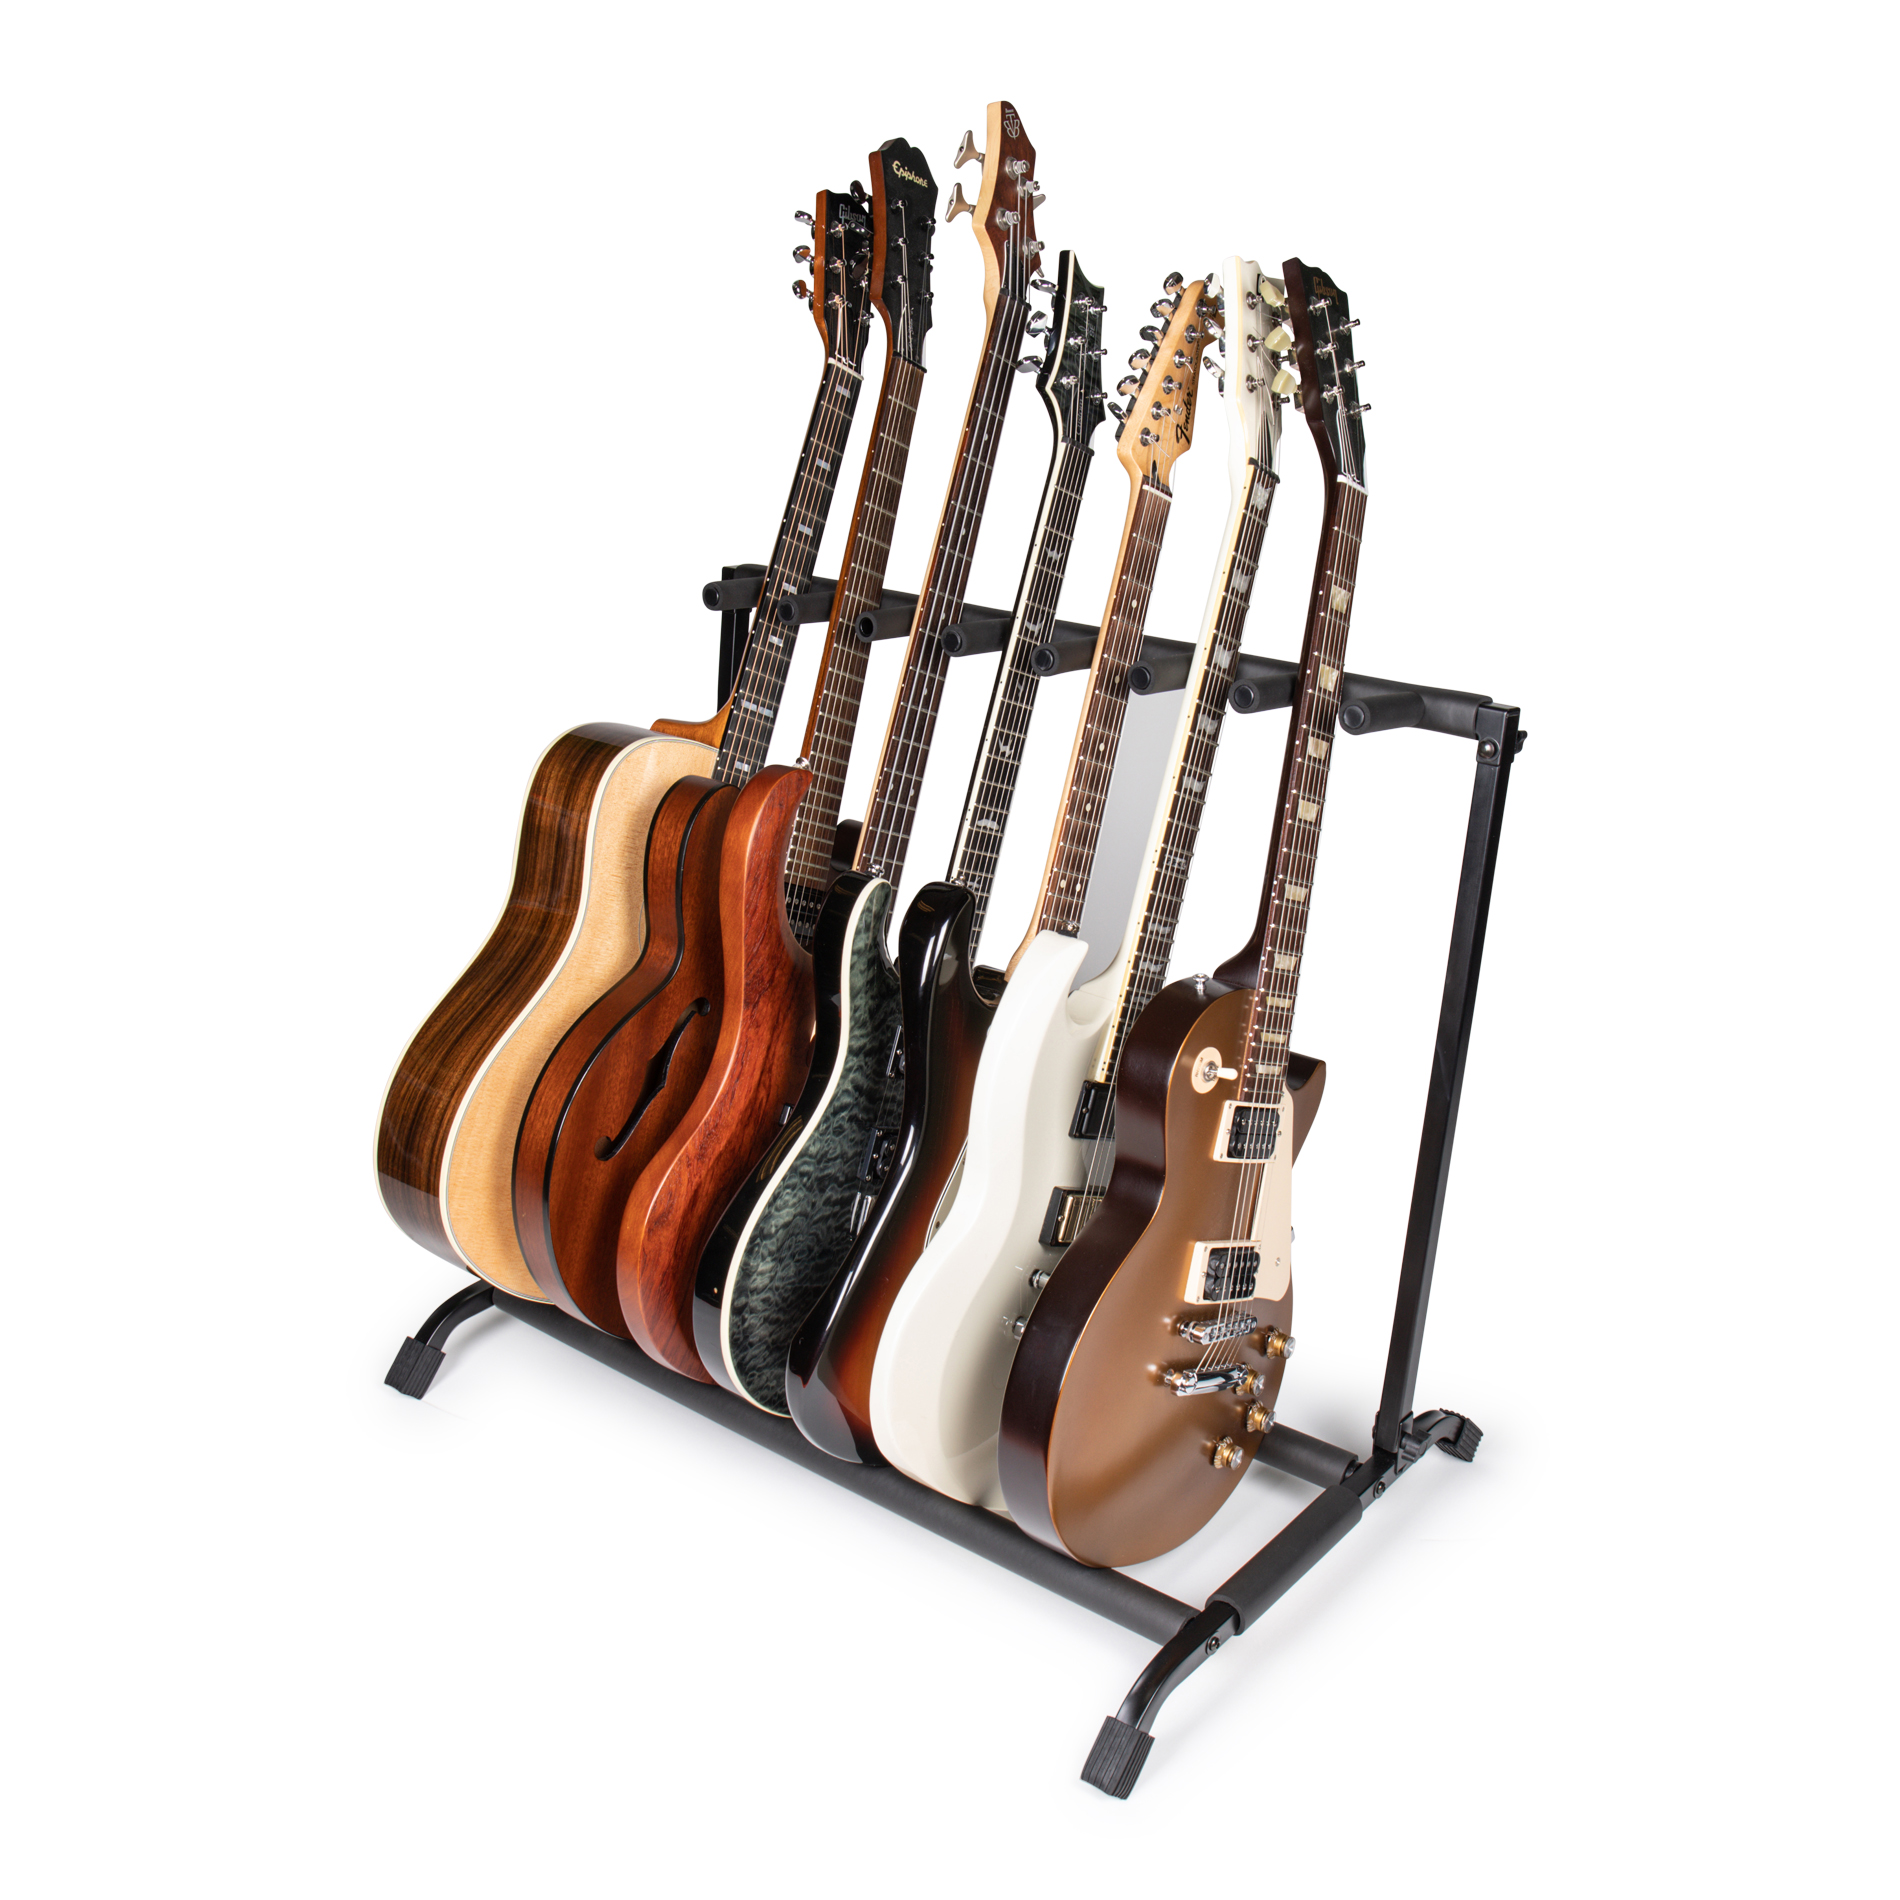 Rok-it 7x Collapsible Guitar Rack - Gator Cases